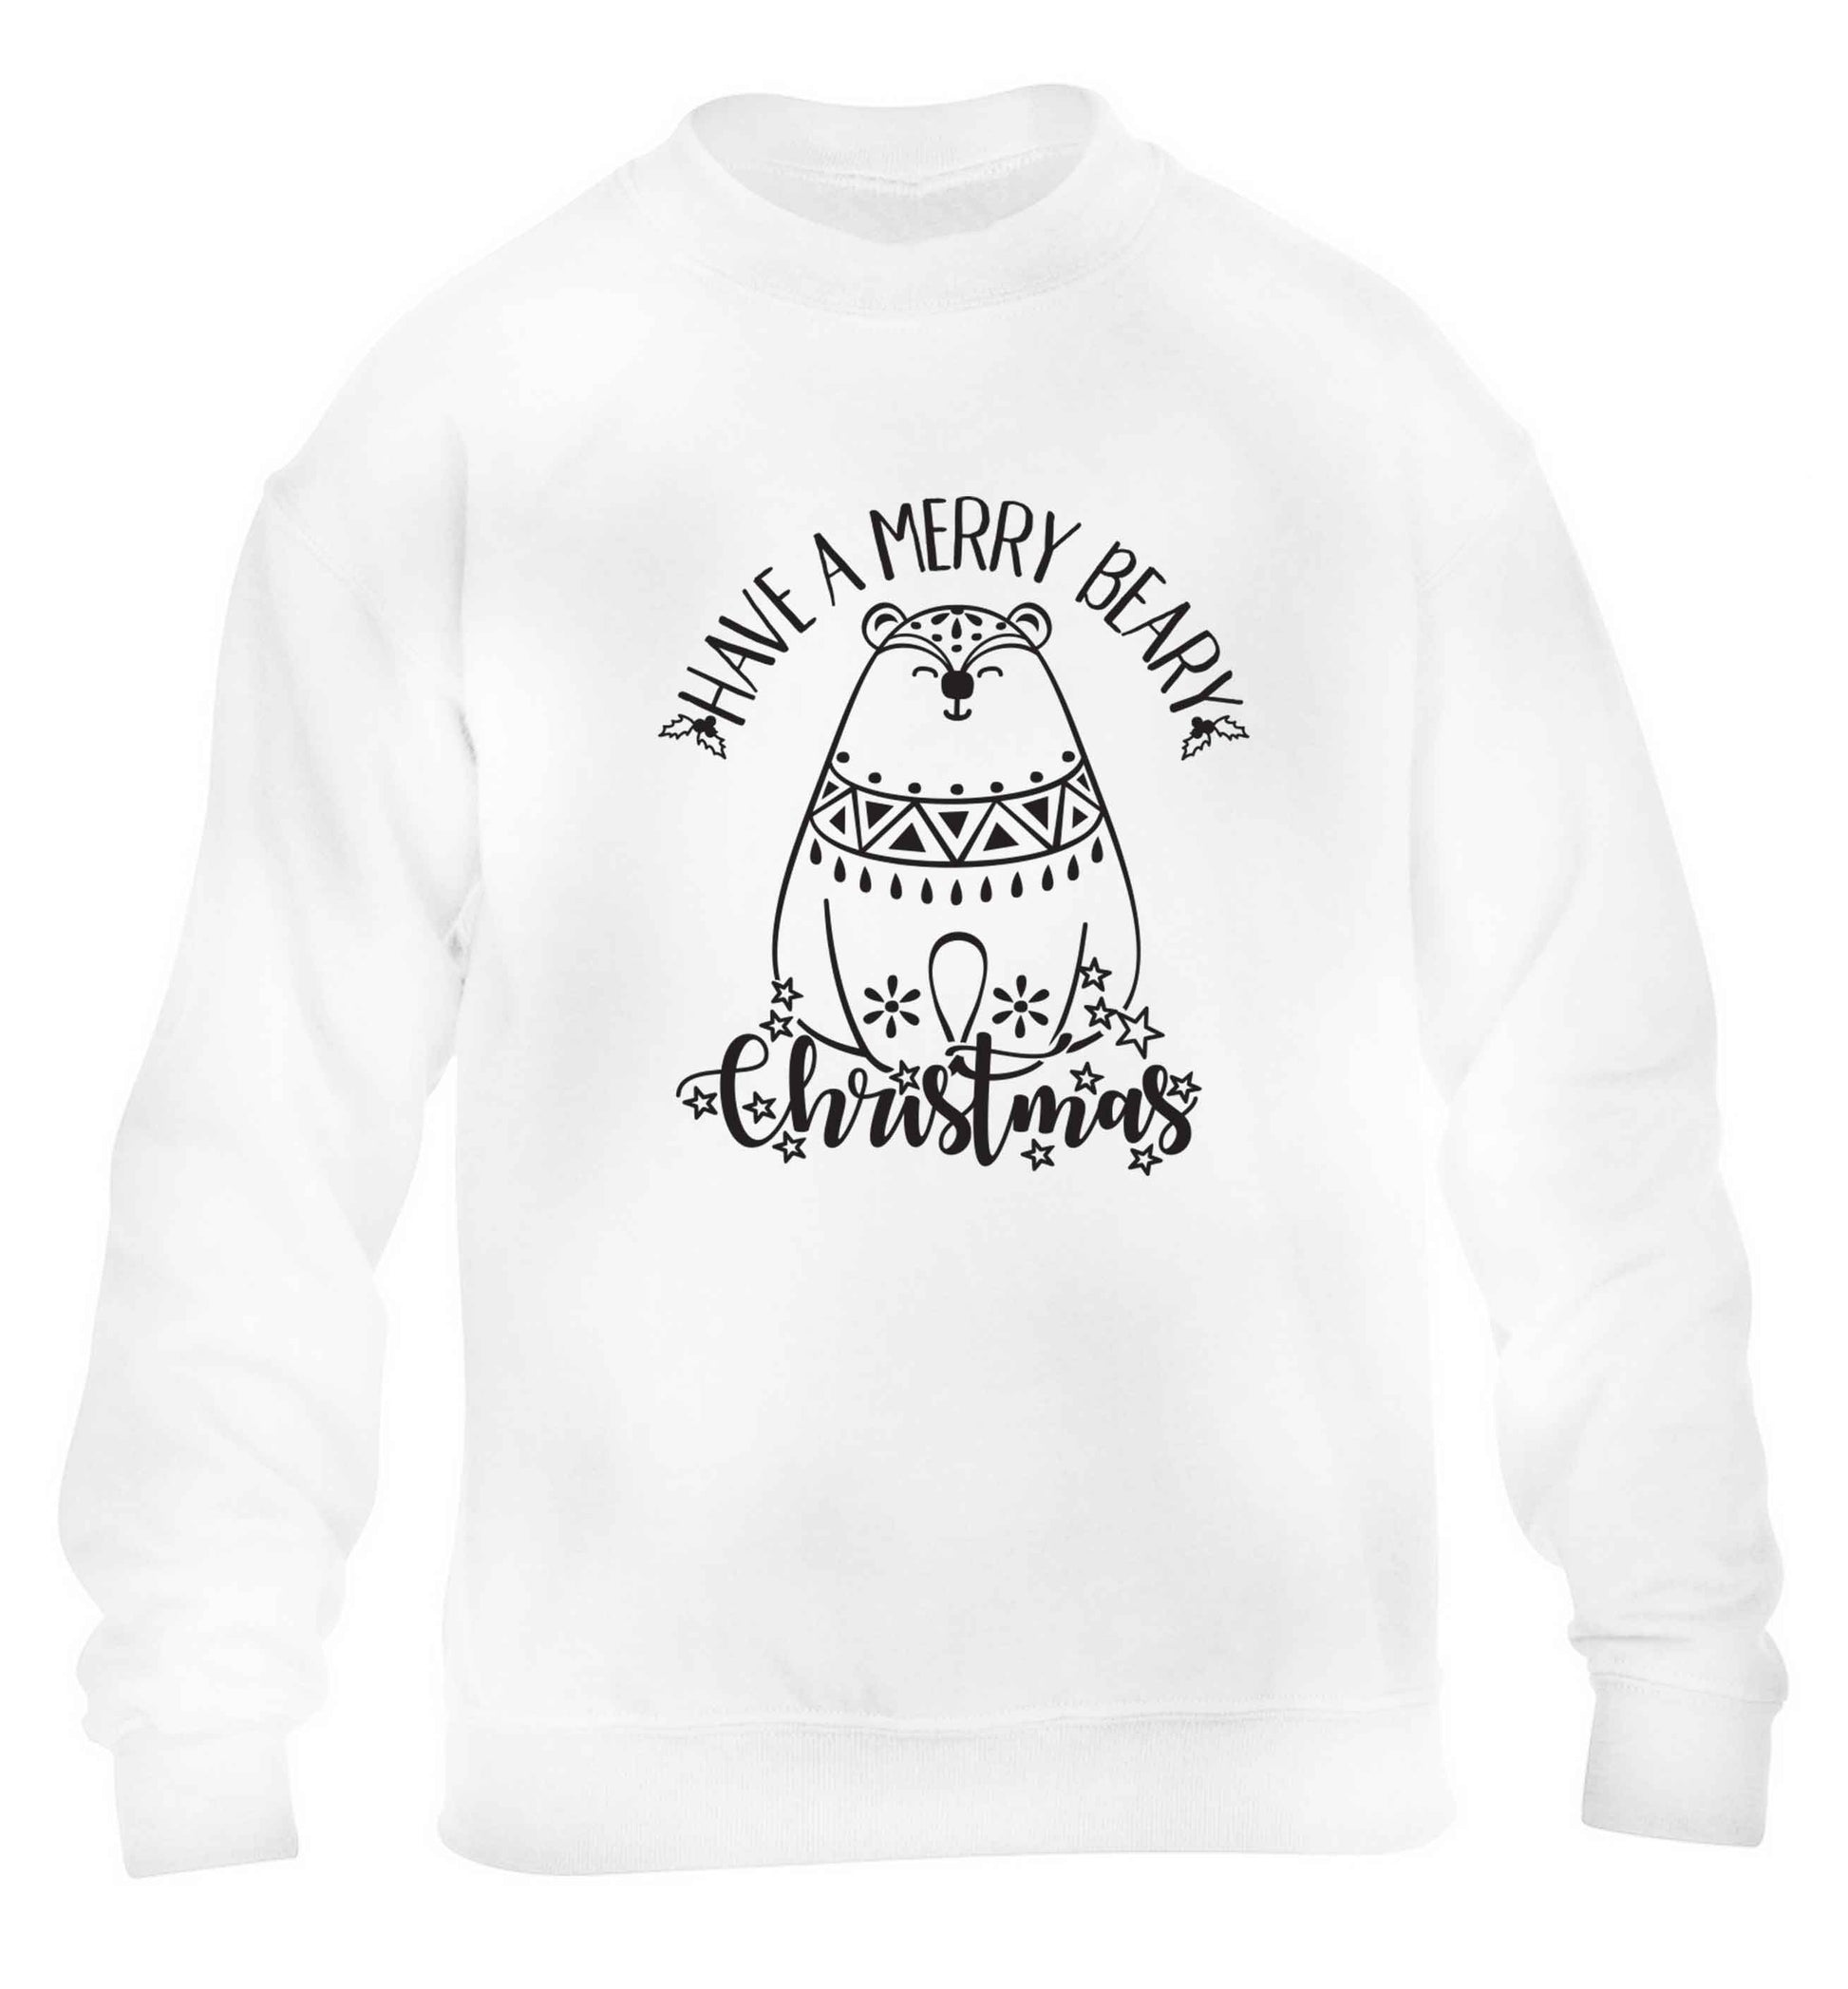 Have a merry beary Christmas children's white sweater 12-13 Years